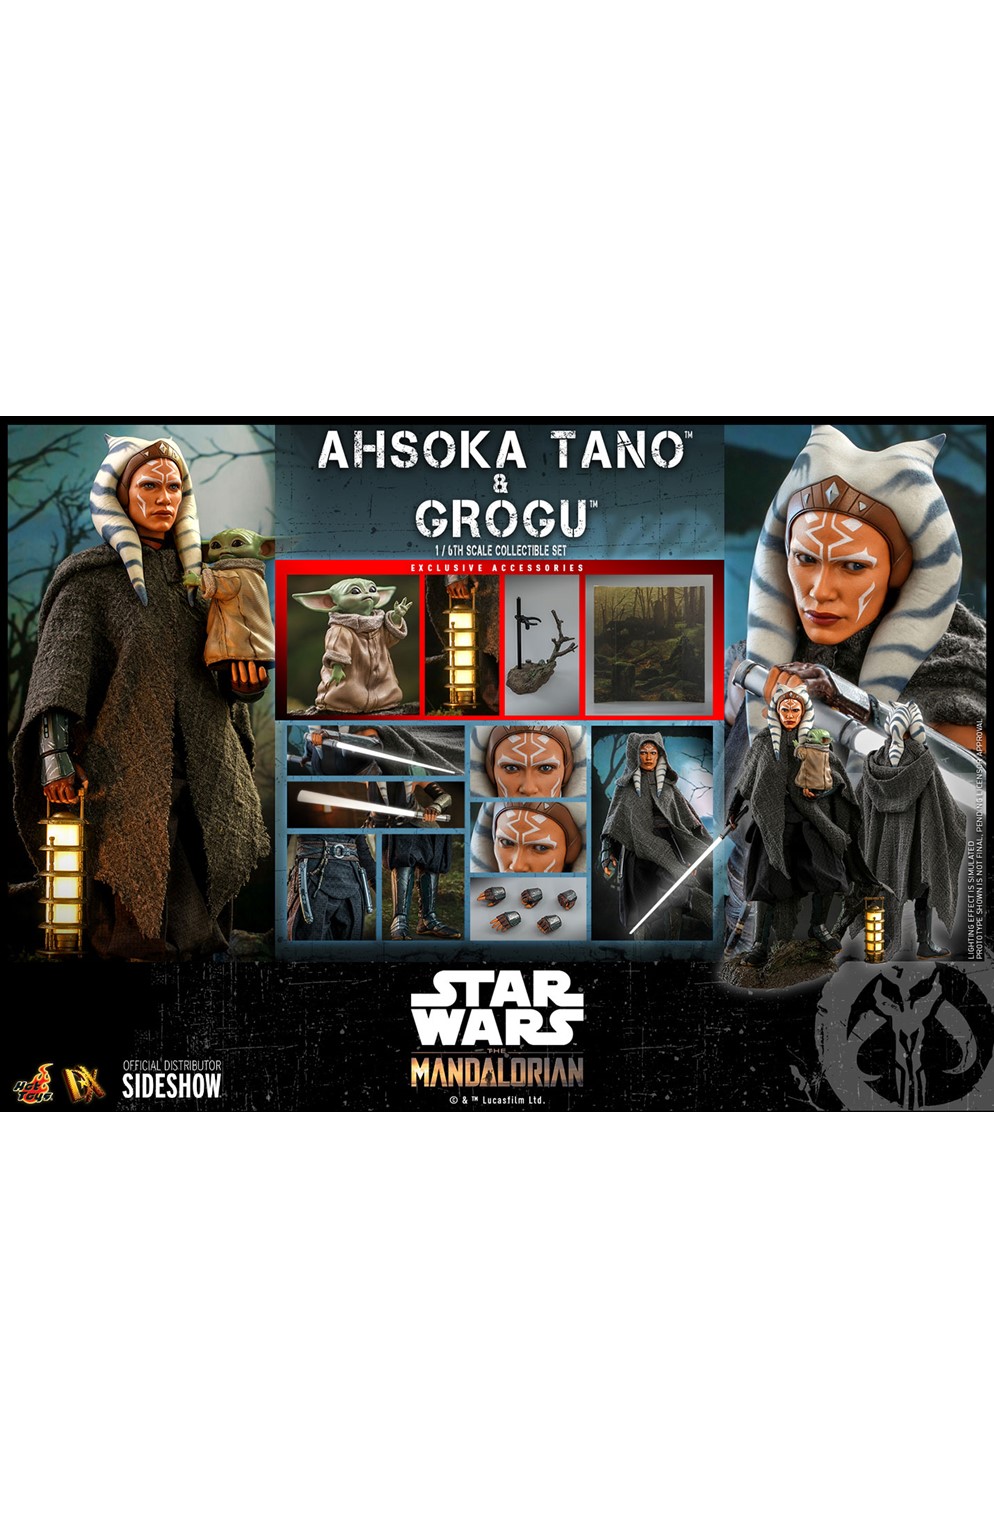 The Mandalorian Ahsoka Tano Deluxe With Grogu Sixth Scale Figure By Hot Toys